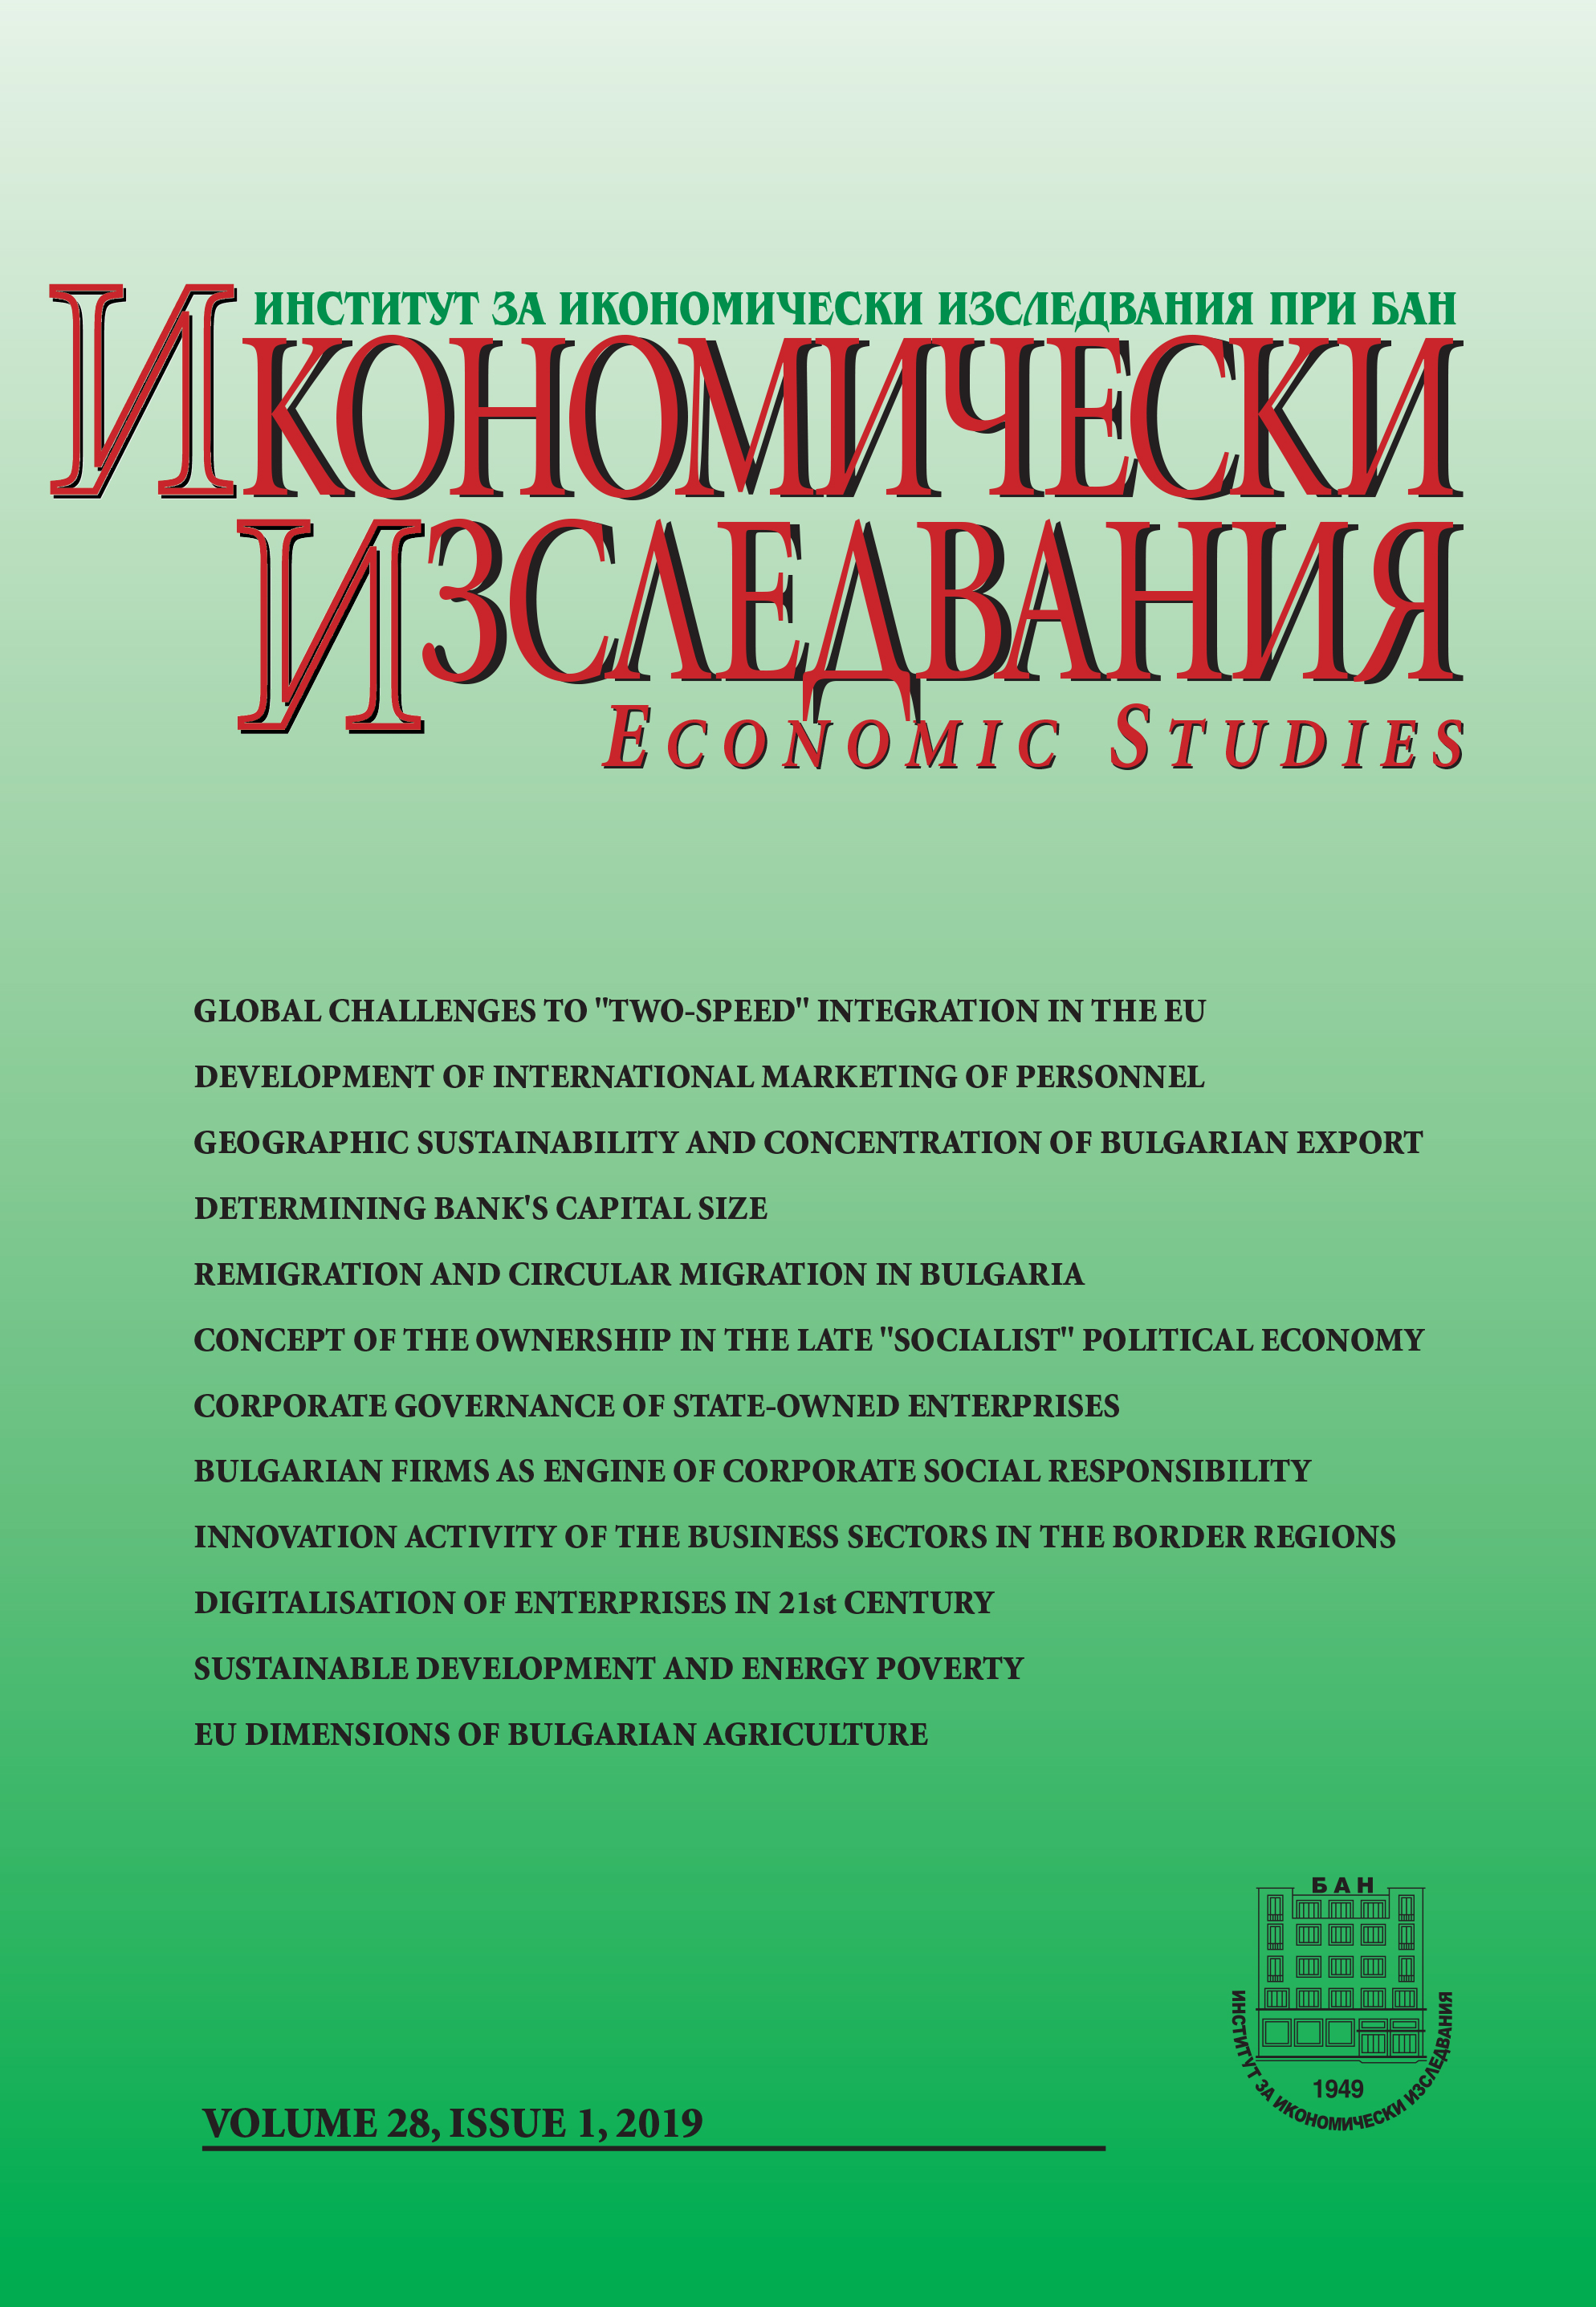 Geographic Sustainability and Geographic Concentration of Bulgarian Export Cover Image